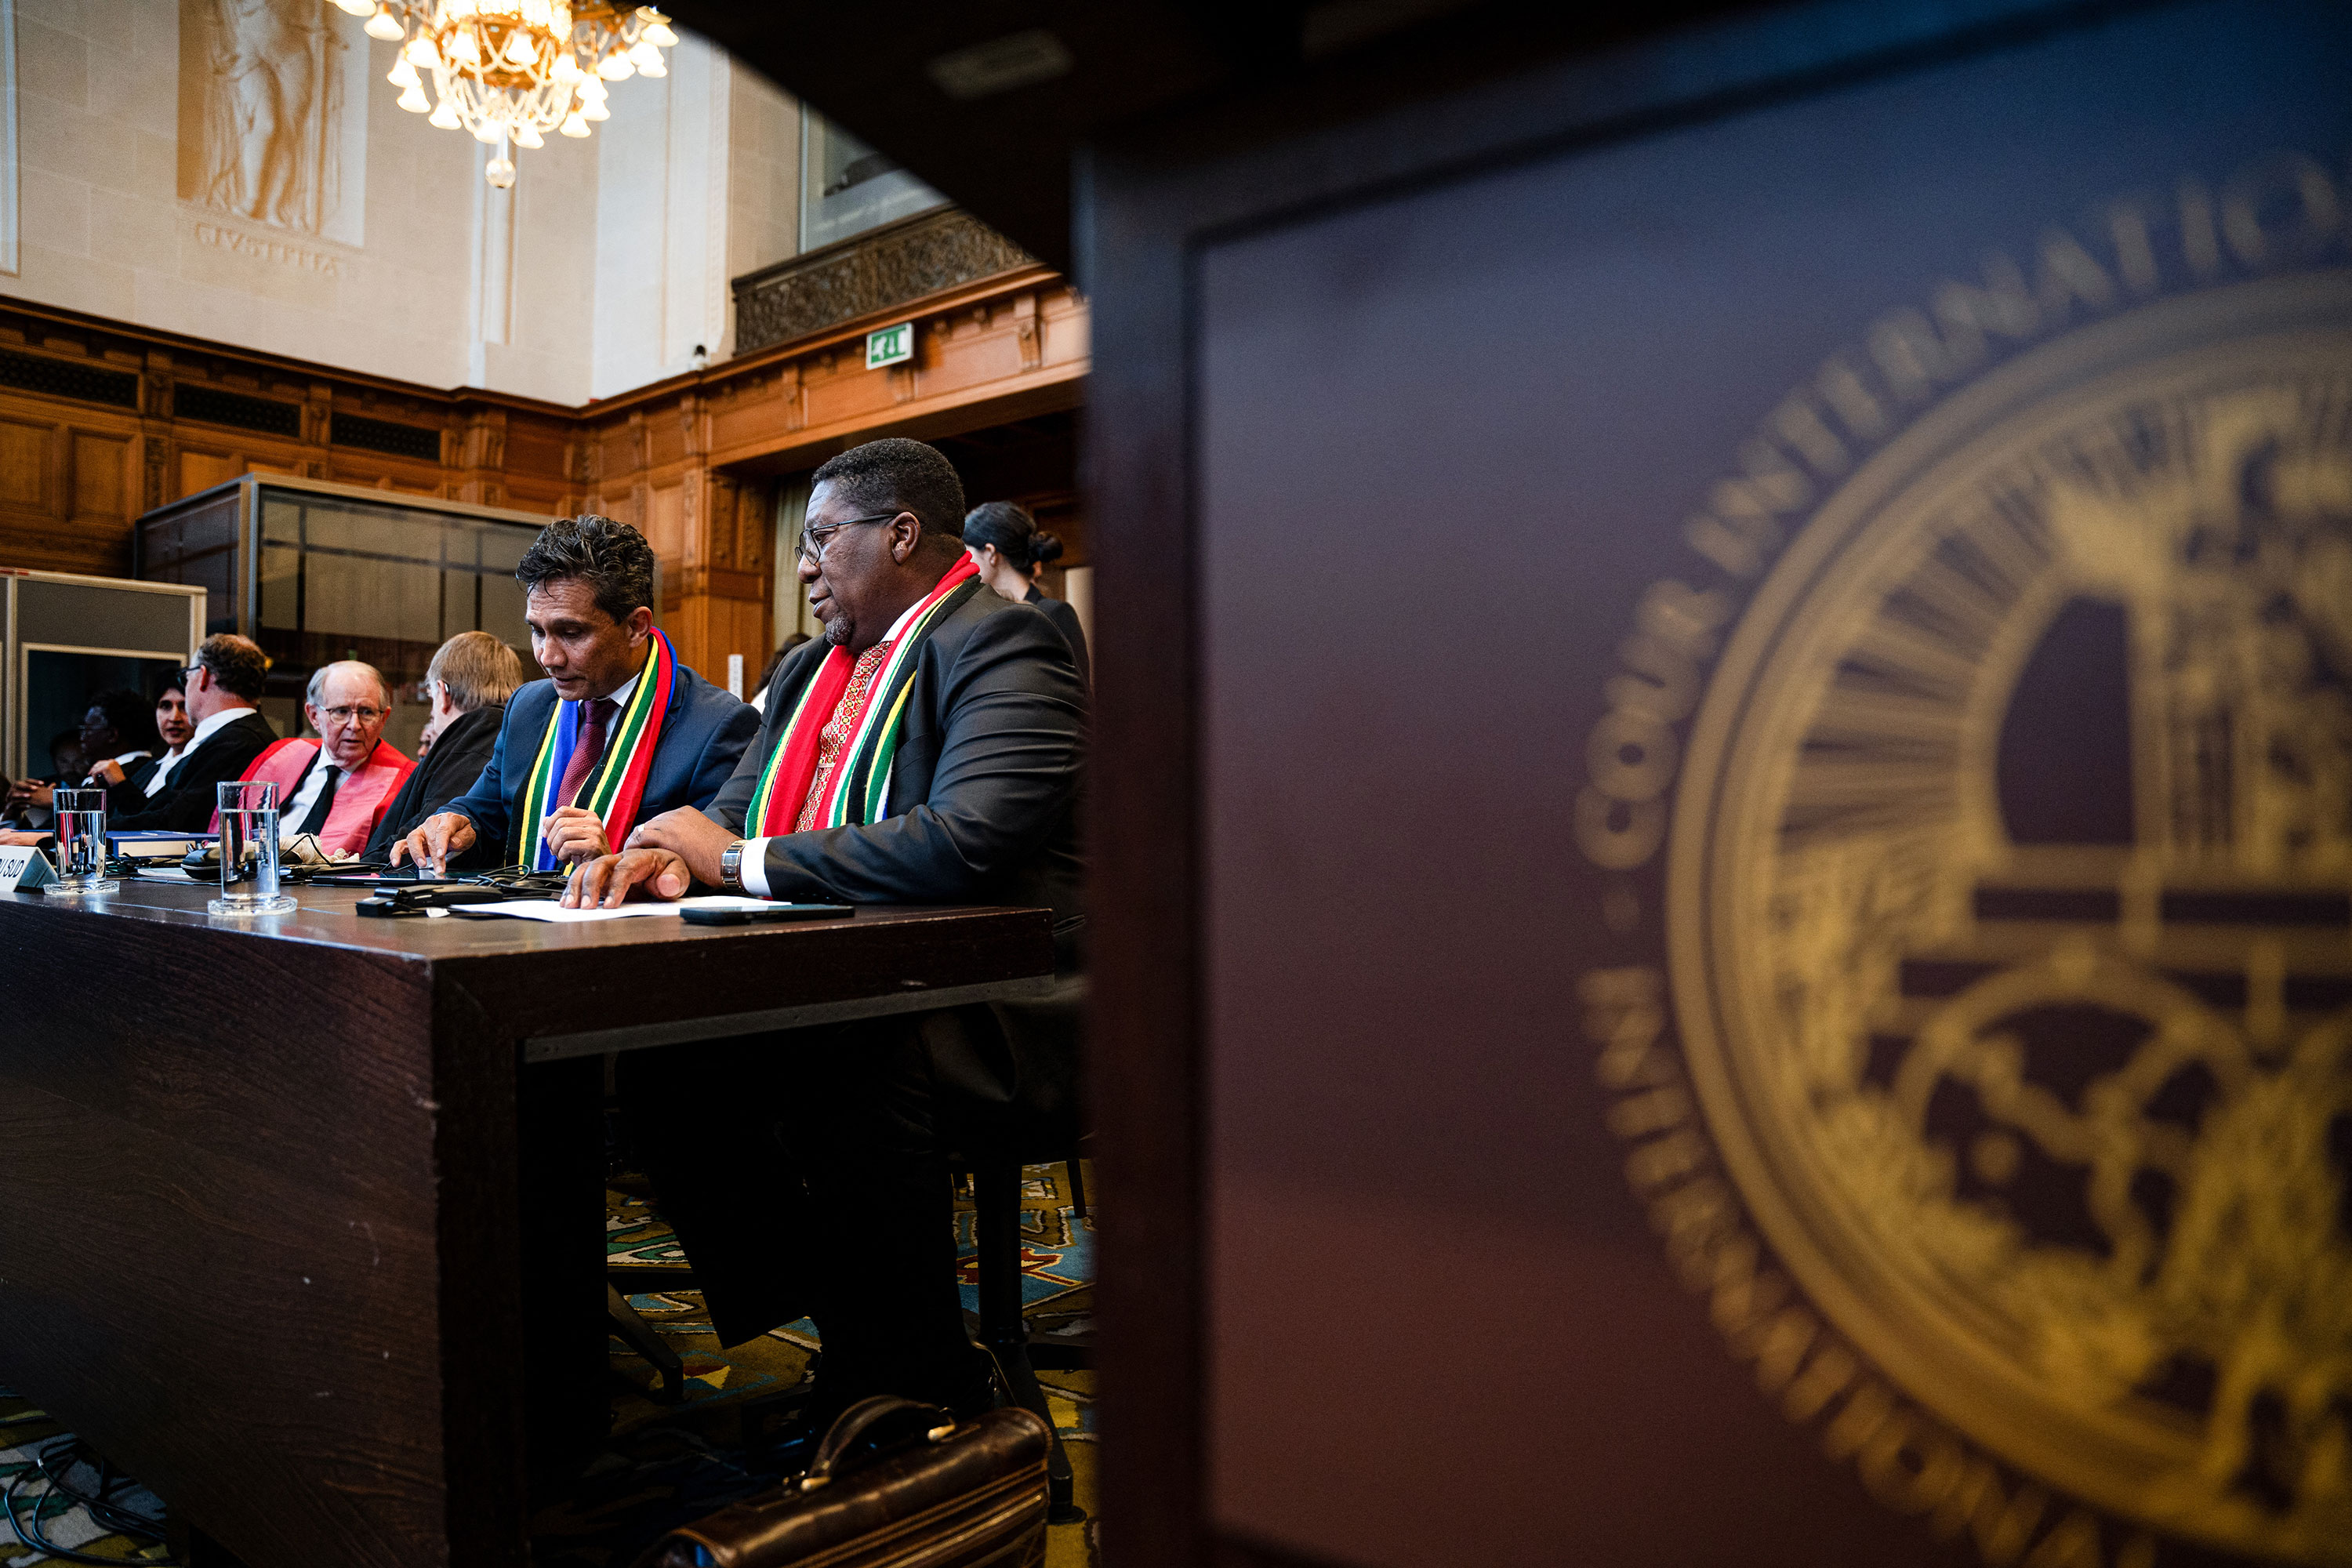 South Africa's Vusimuzi Madonsela, seated right, and Cornelius Scholtz, seated second left, attend a hearing at the International Court of Justice in The Hague, Netherlands, on May 16. 